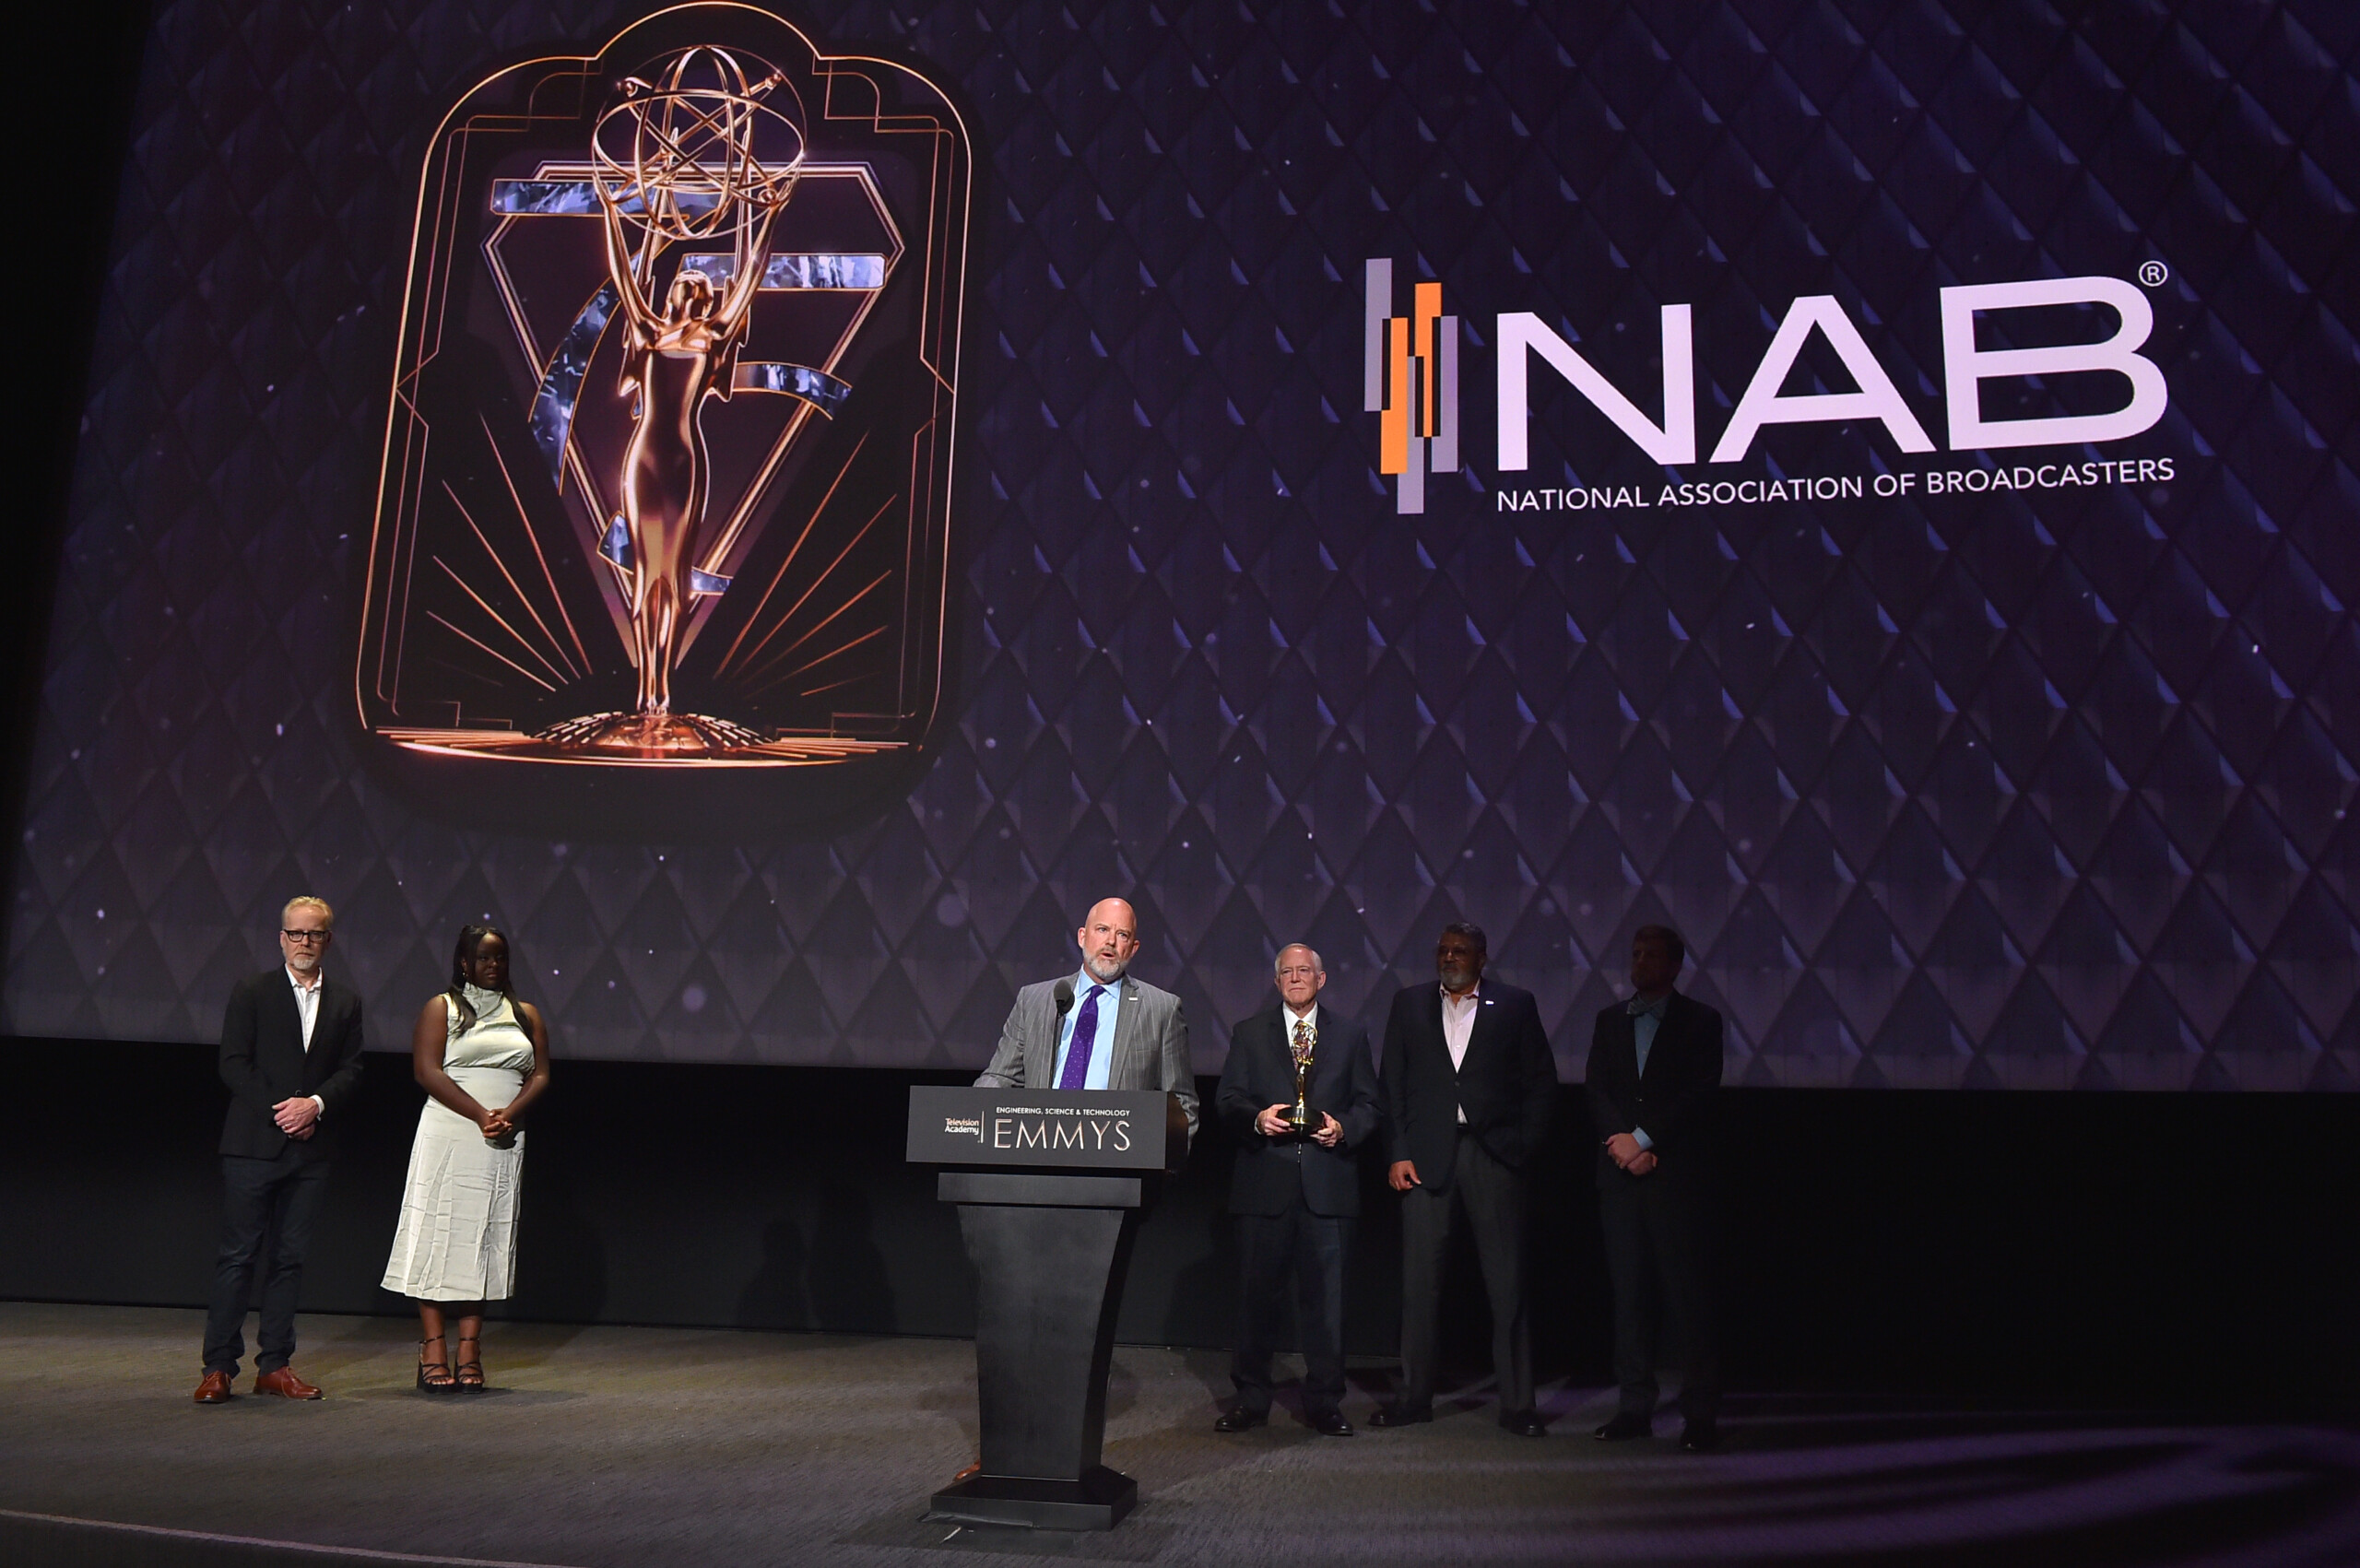 Sam Matheny from the National Association of Broadcasters (NAB) accepts the Philo T. Farnsworth Corporate Achievement Award given to the NAB at the 75th Engineering, Science & Technology Emmy Awards on Wednesday, October 18, 2023 onstage at the Television Academys Wolf Theatre in the Saban Media Center in Los Angeles, CA. (Photo by Jordan Strauss/Invision for The Television Academy/AP Images)